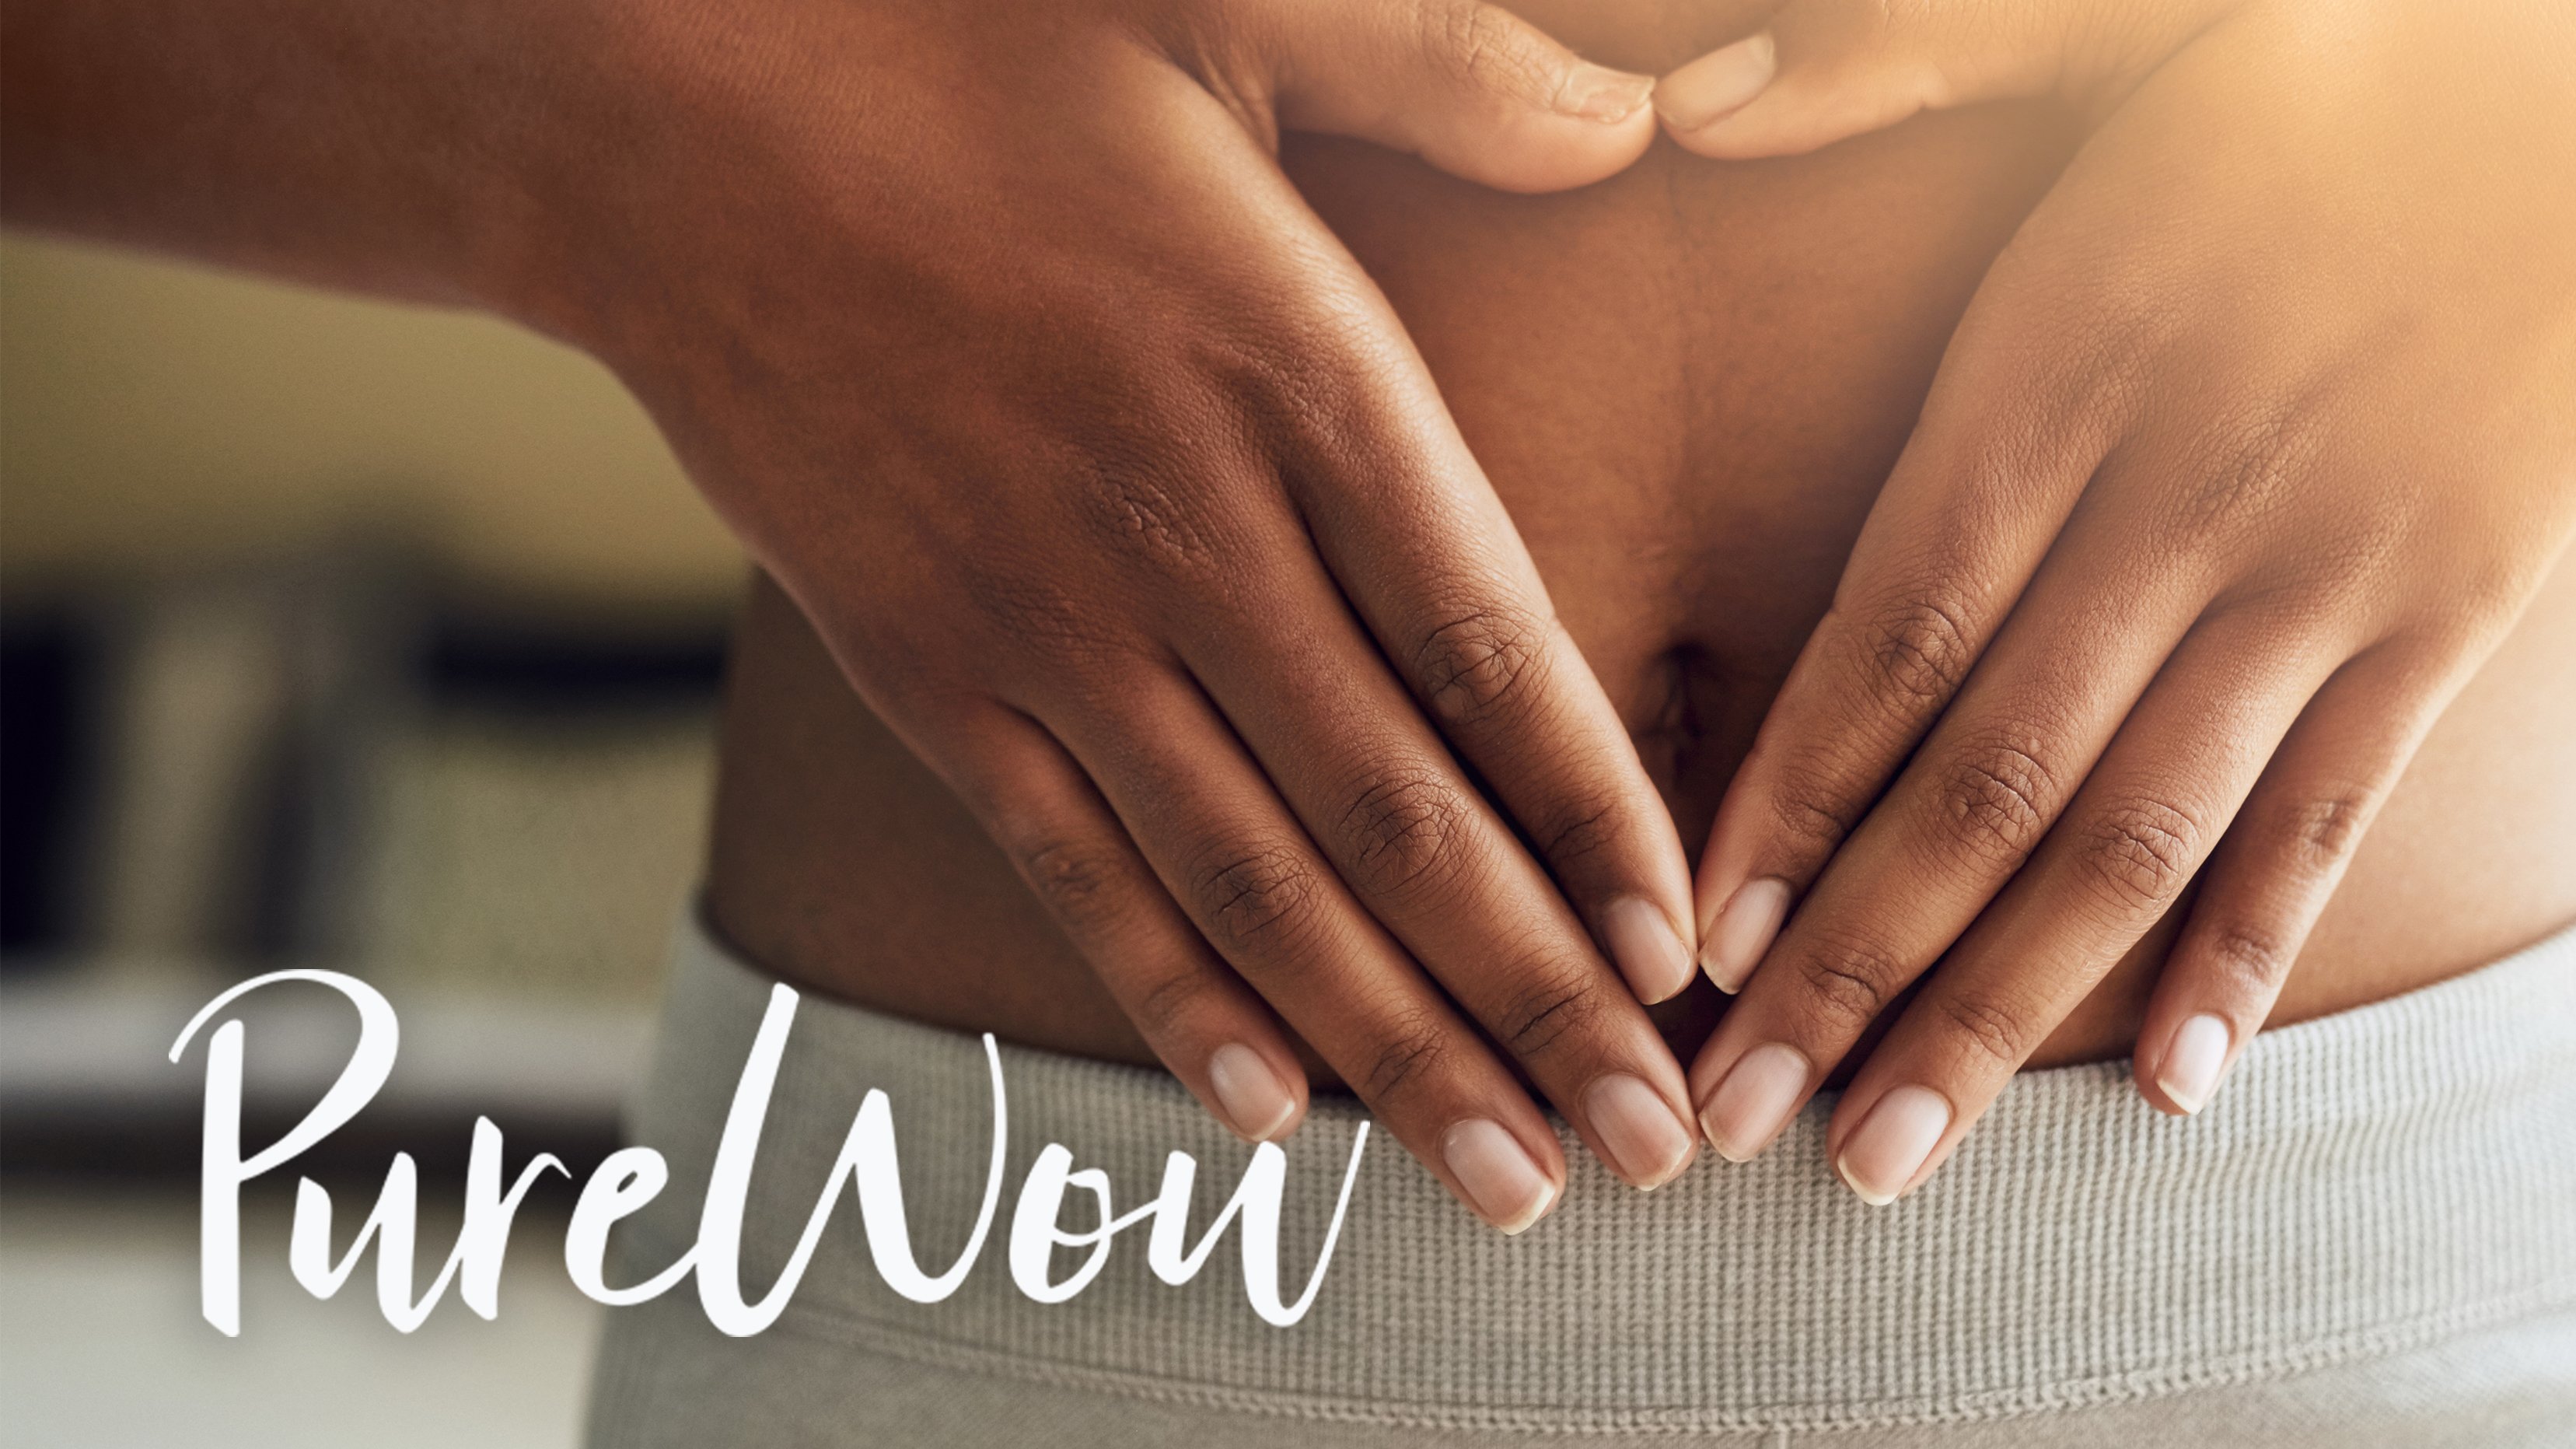 A PureWow author reviews the results of her Ixcela gut microbiome test.